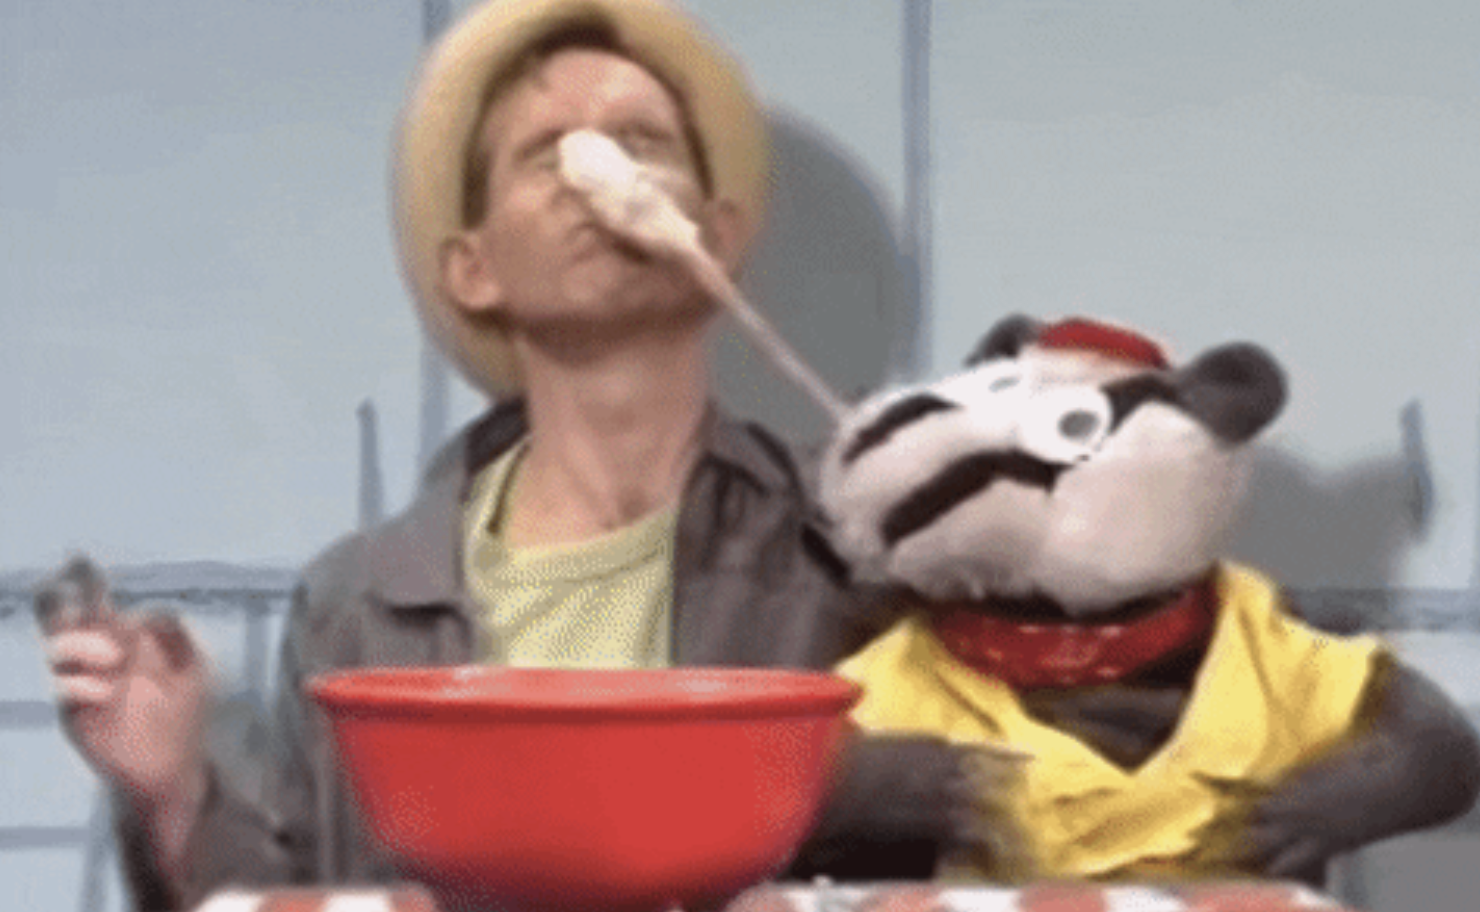 Badger from children's TV show Bodger & Badger making a mess with instant mashed potato.